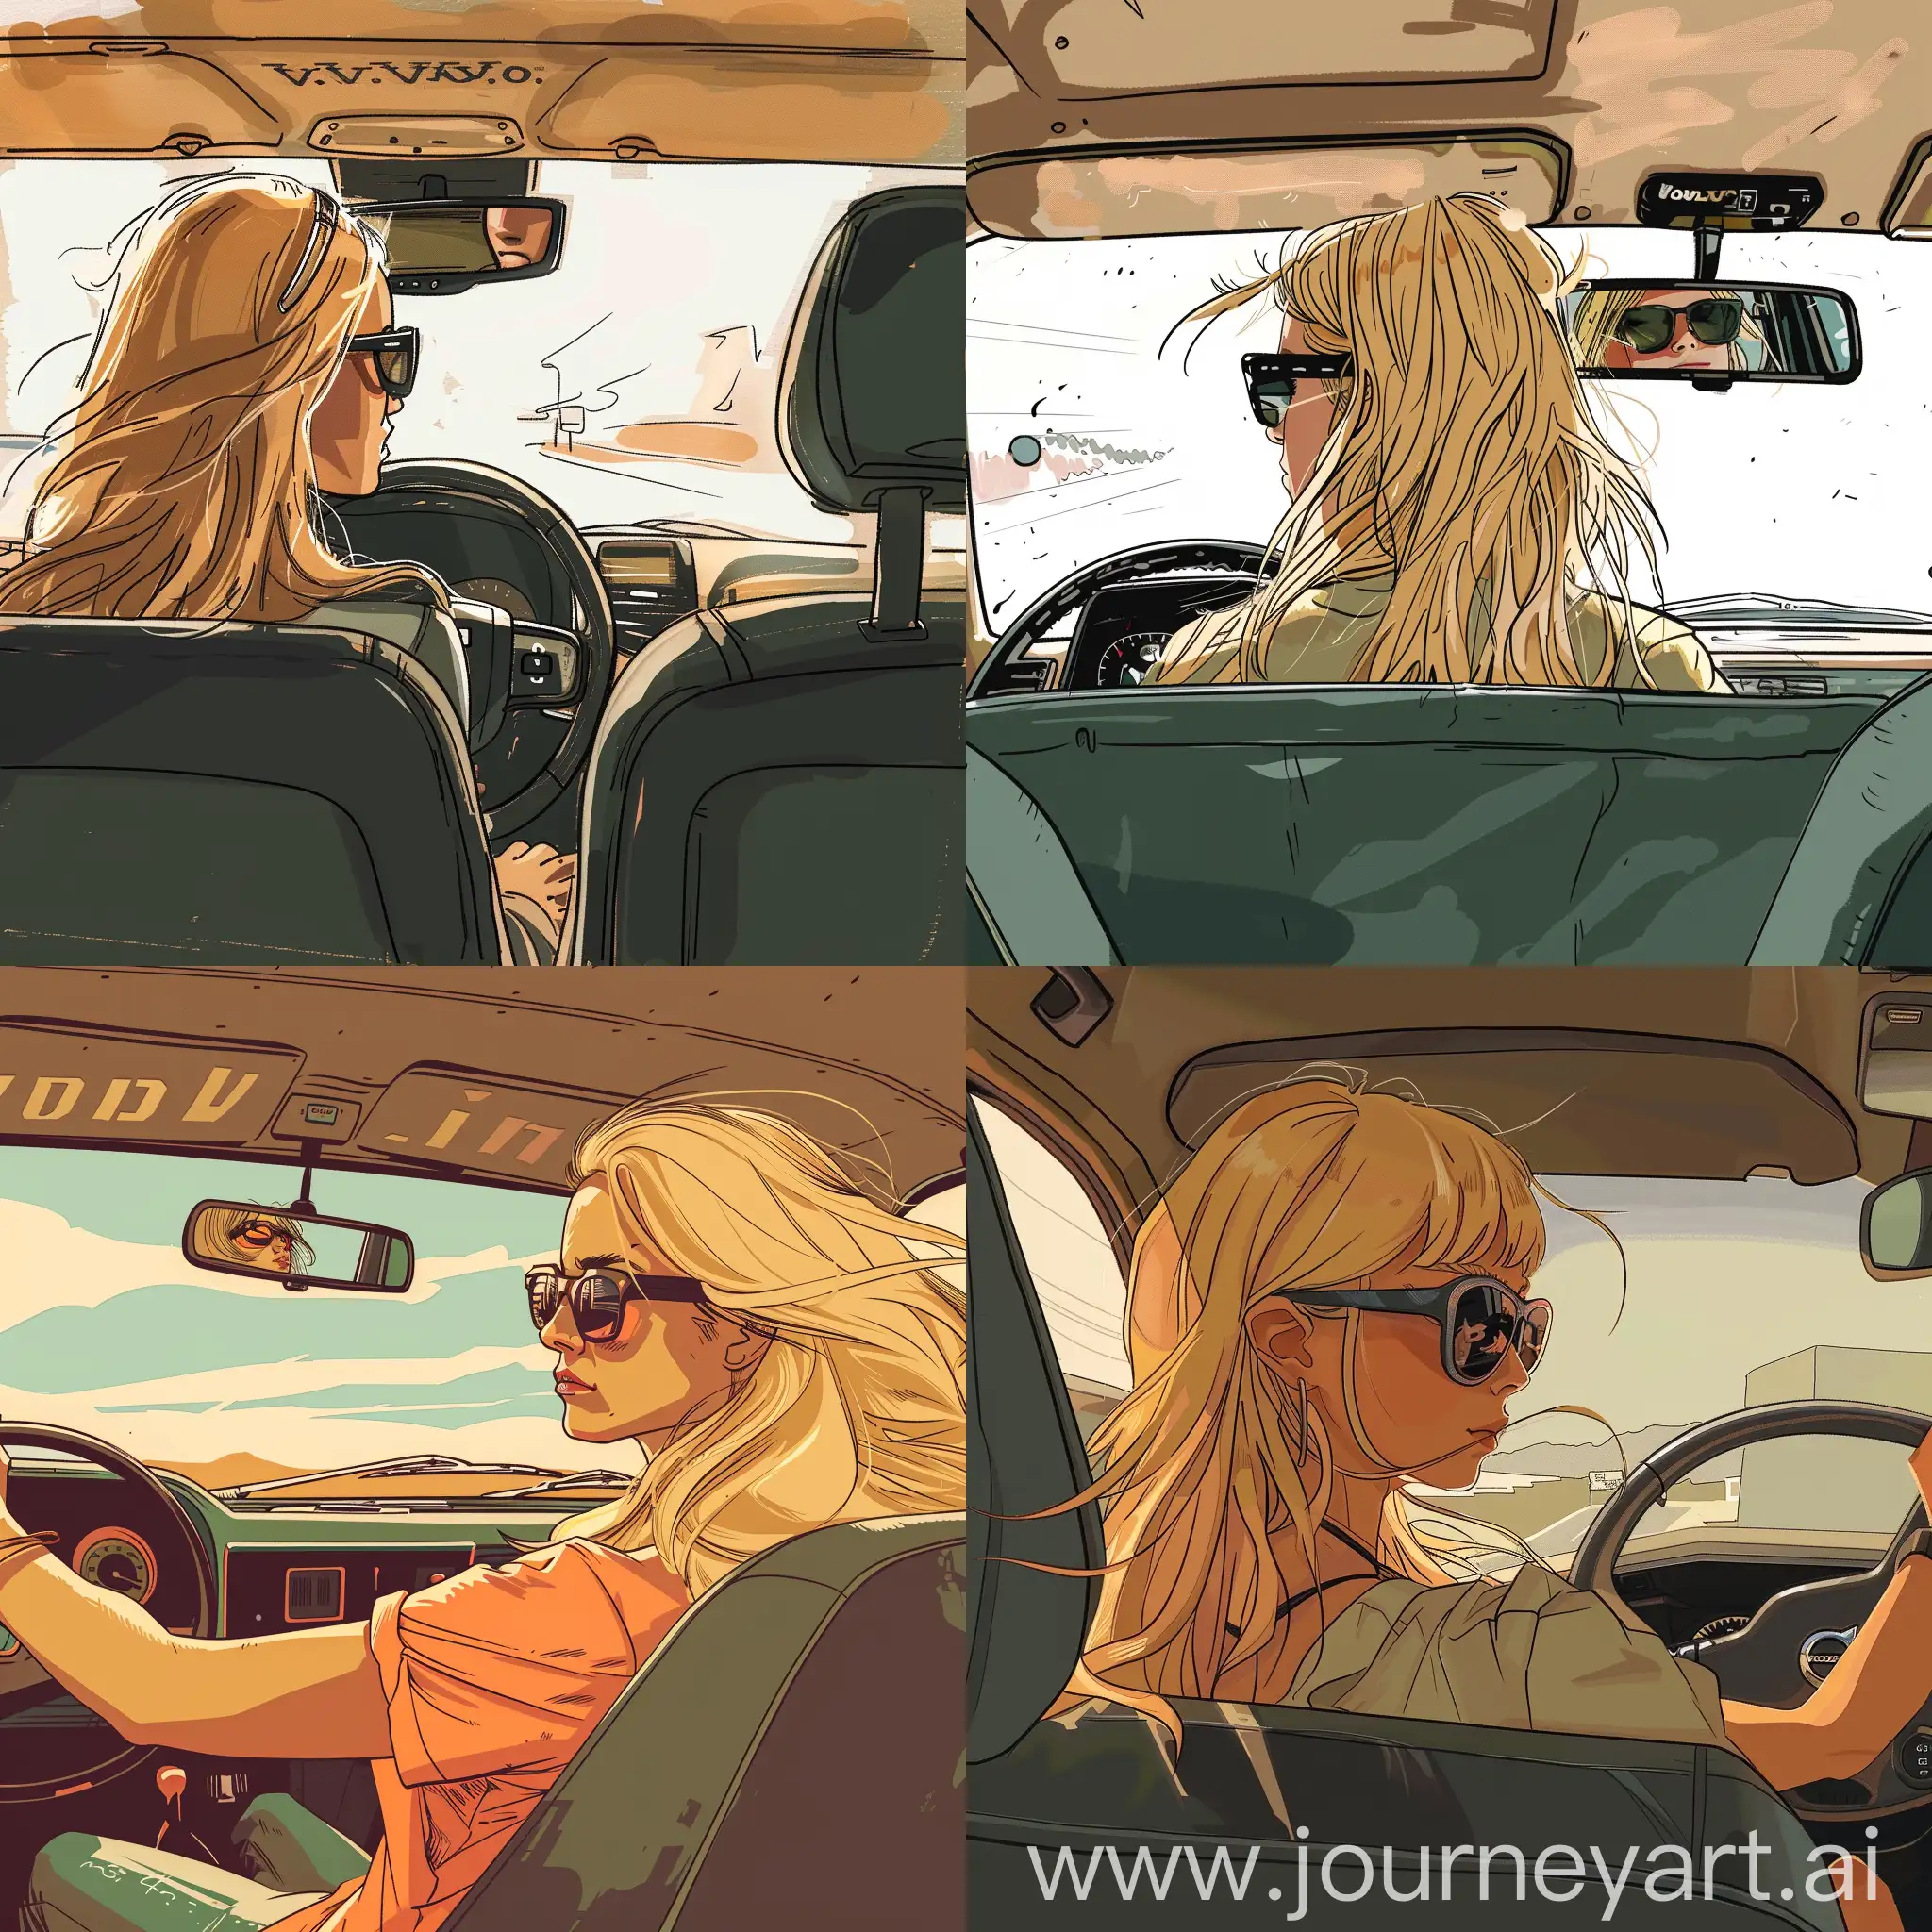 Blond girl driving a volvo.
The girl uses sun glas. Draw the view from back seat of the car